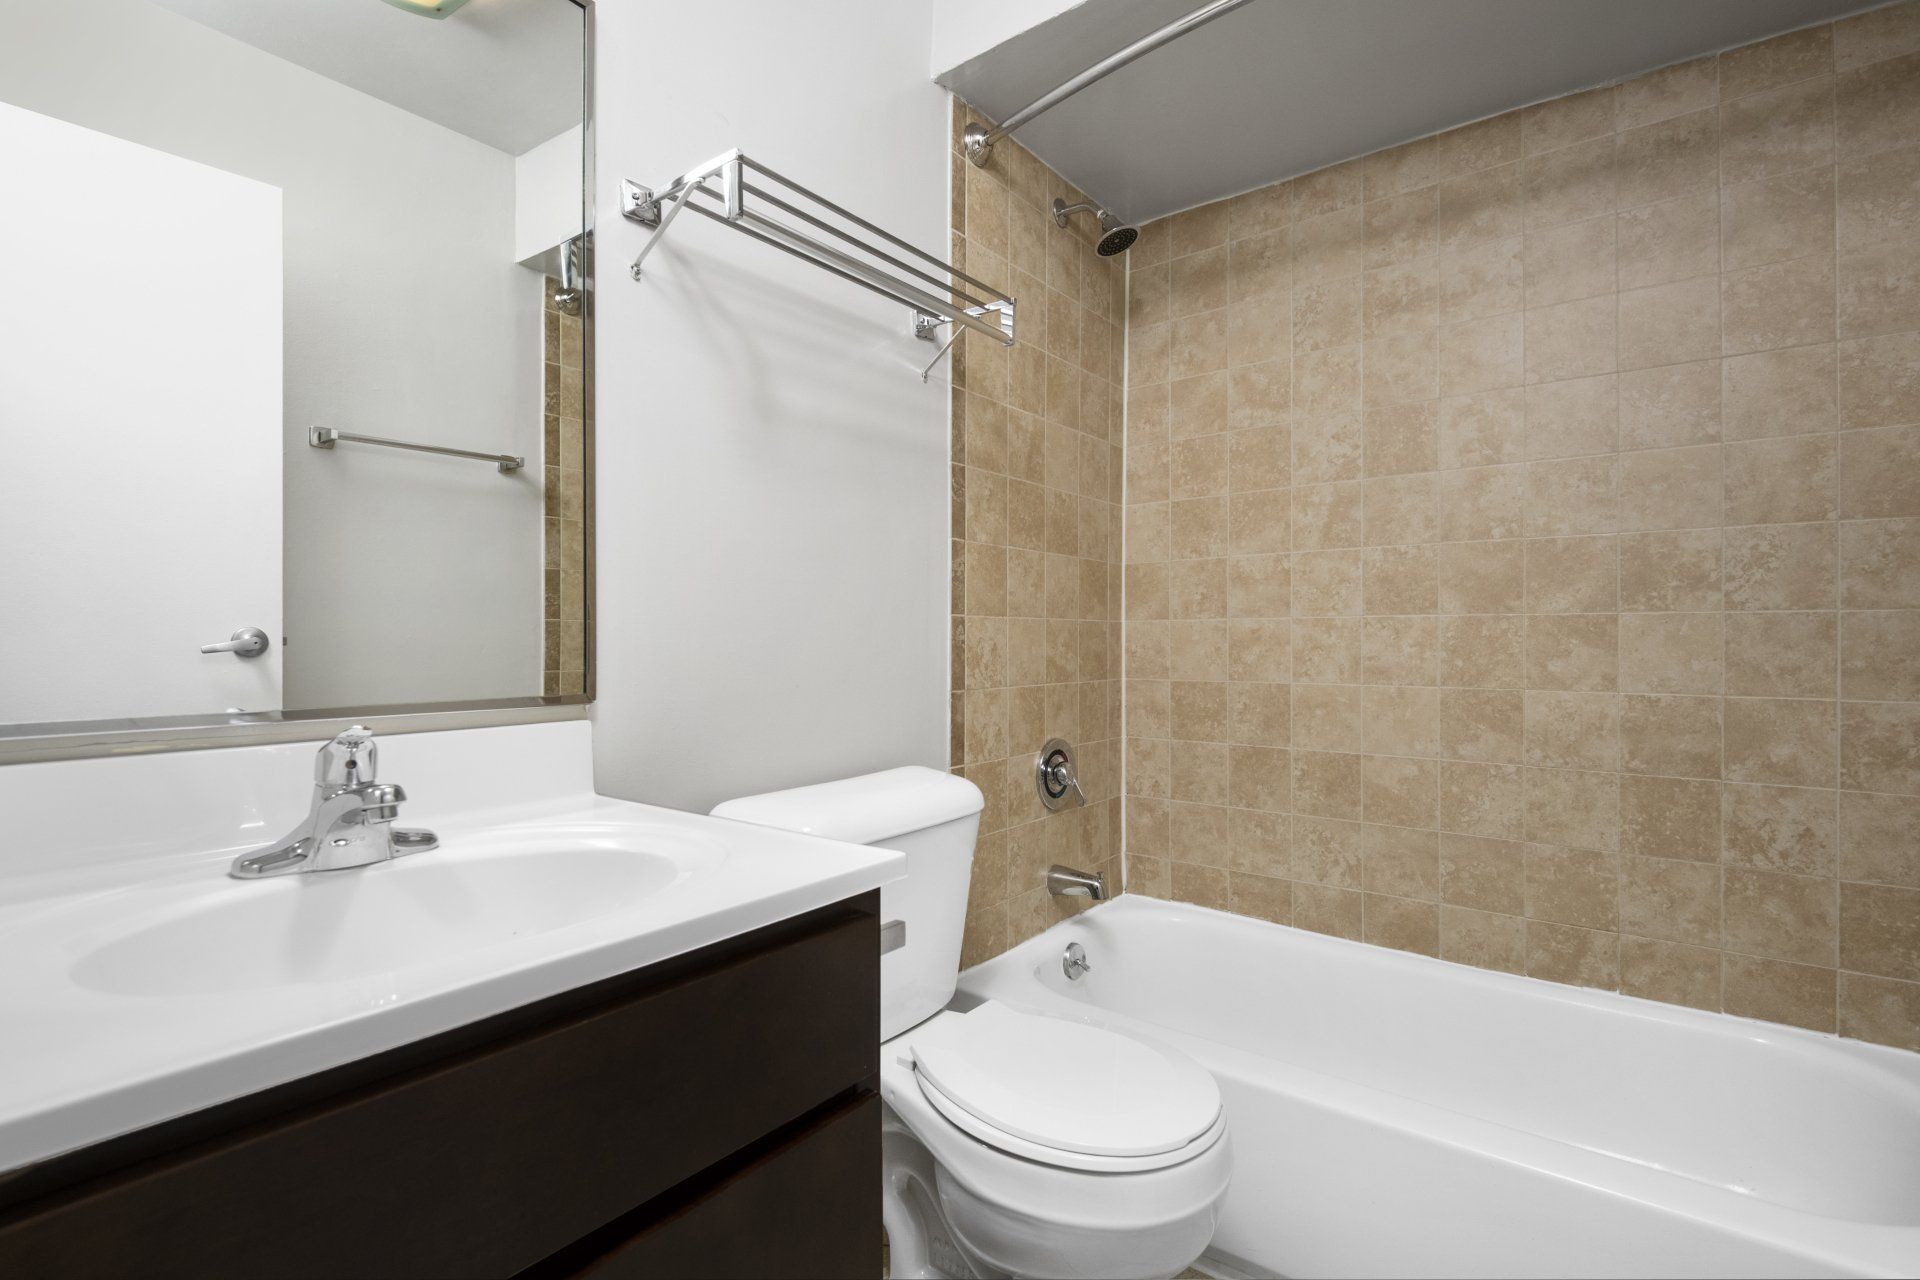 A bathroom with a toilet, sink, and bathtub at Reside 707 in Lakeview, Chicago.